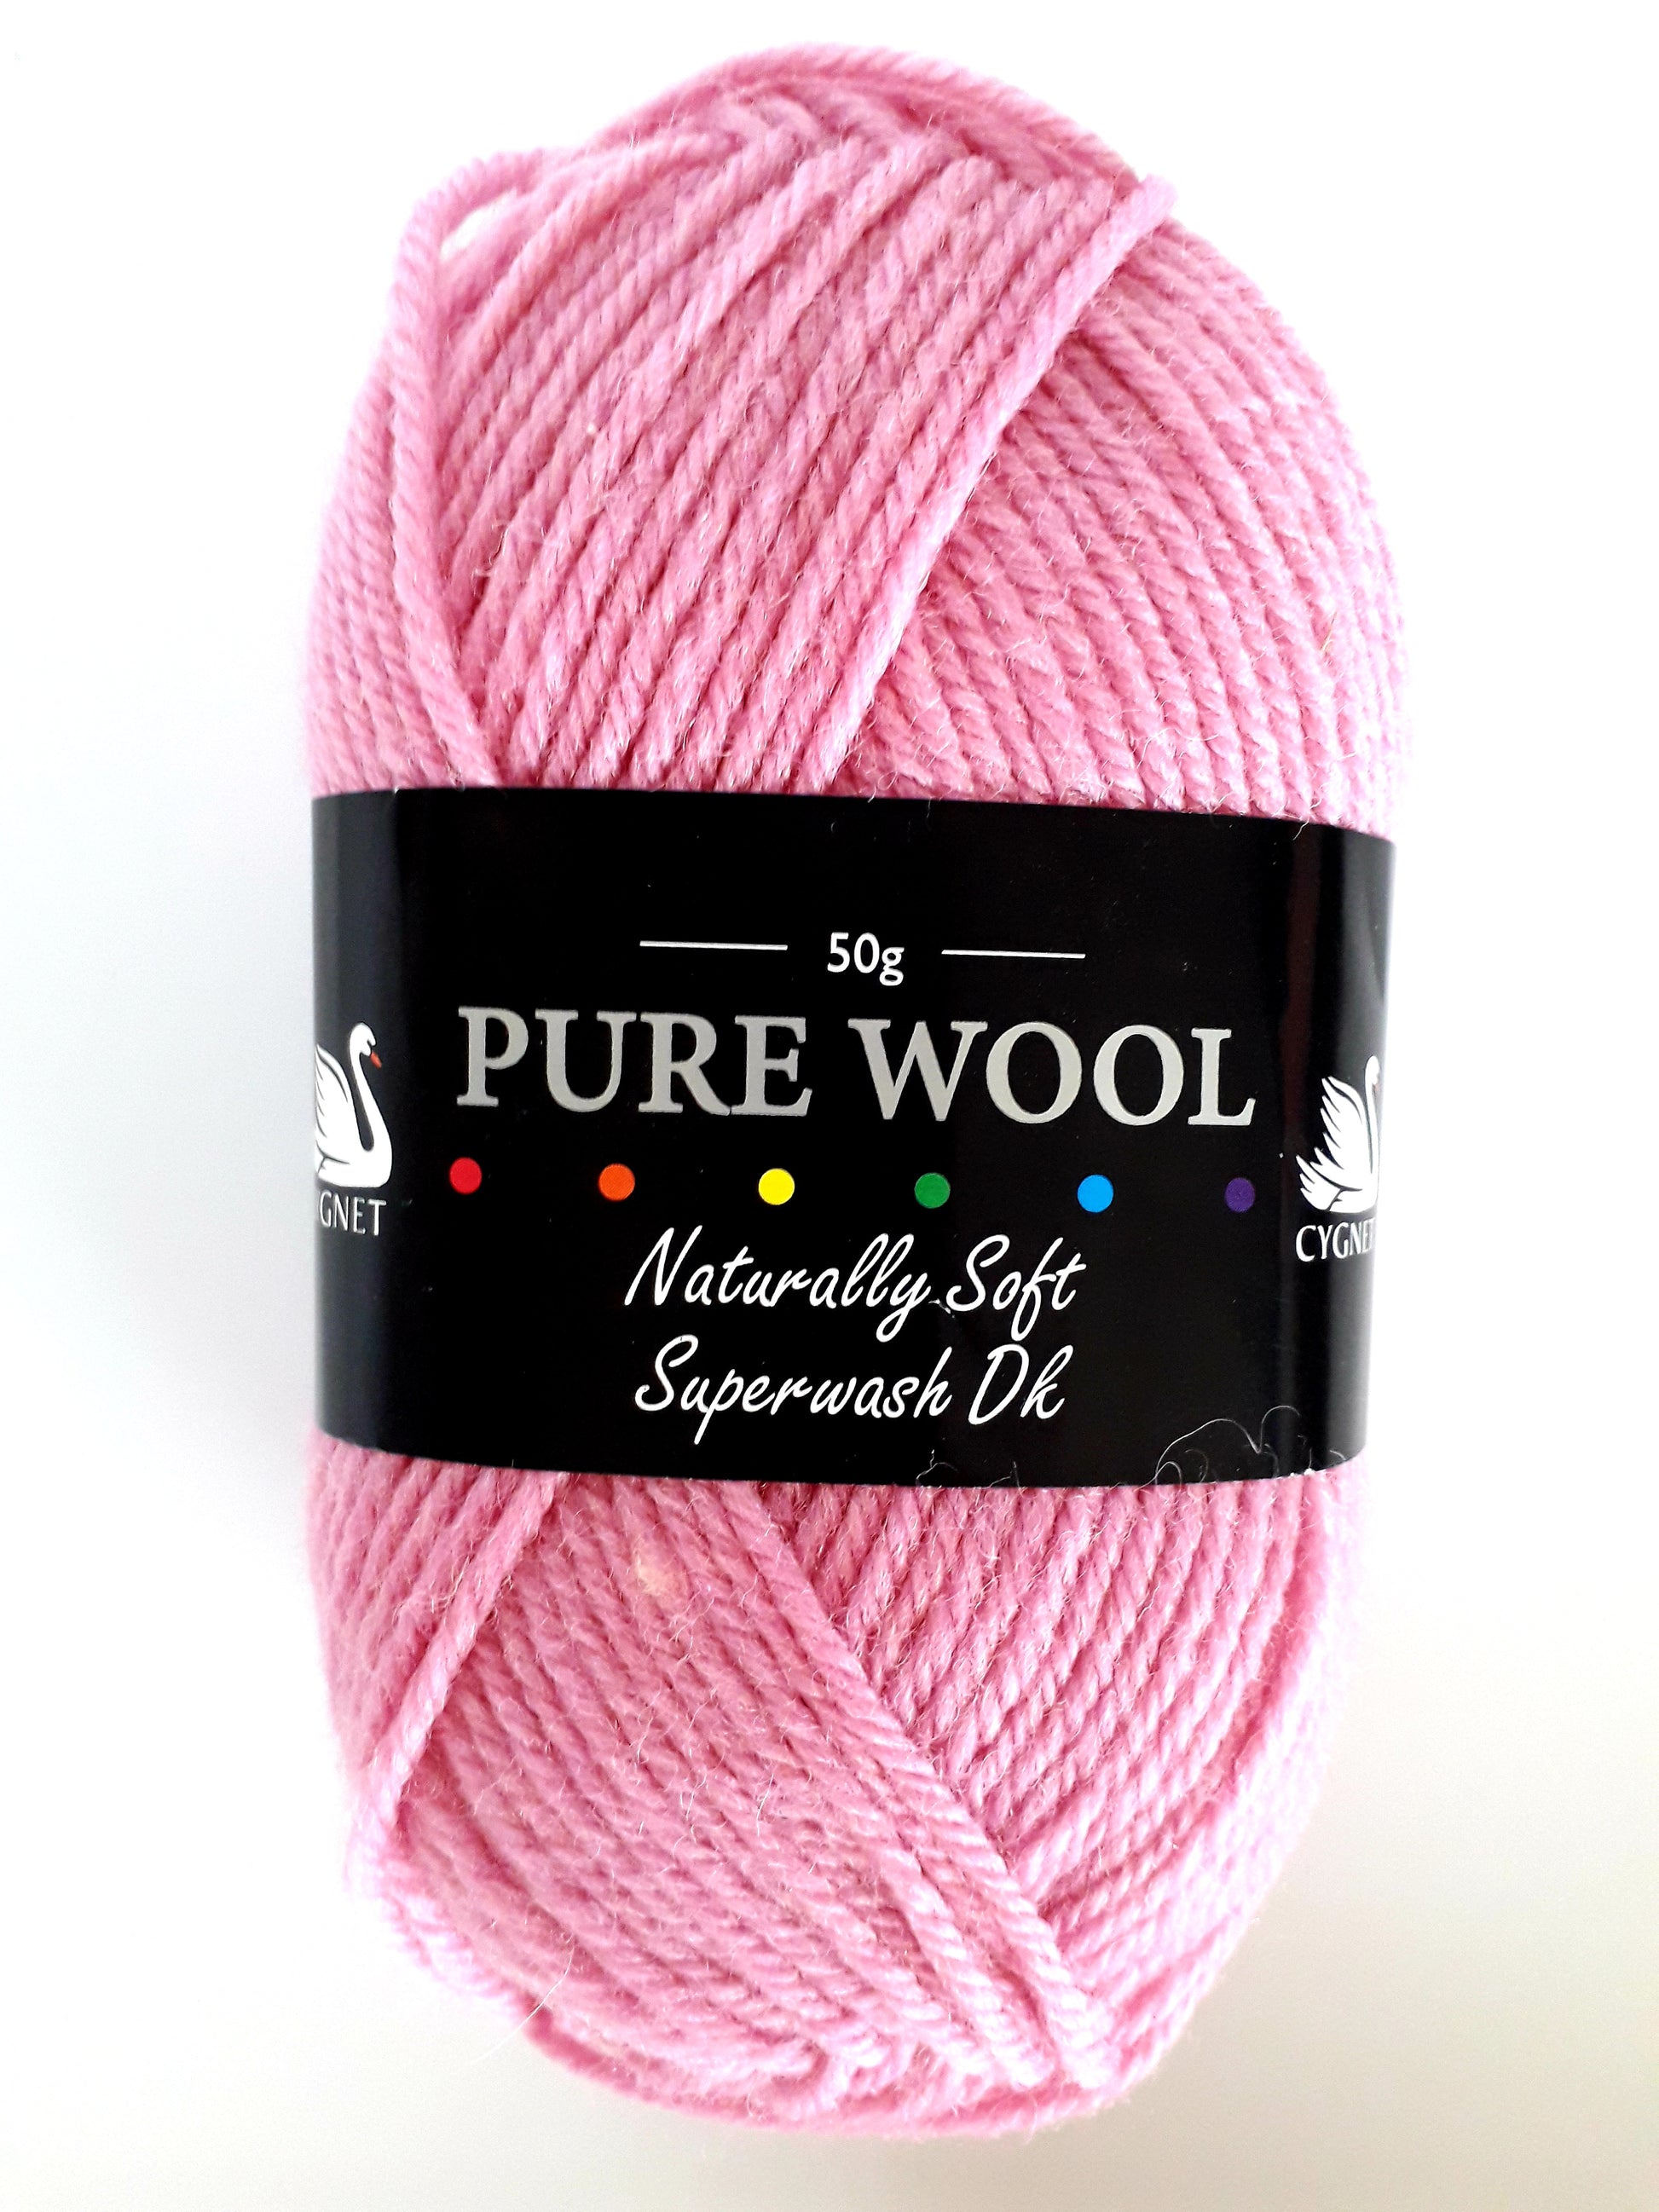 A candy pink coloured ball of cygnet superwash wool